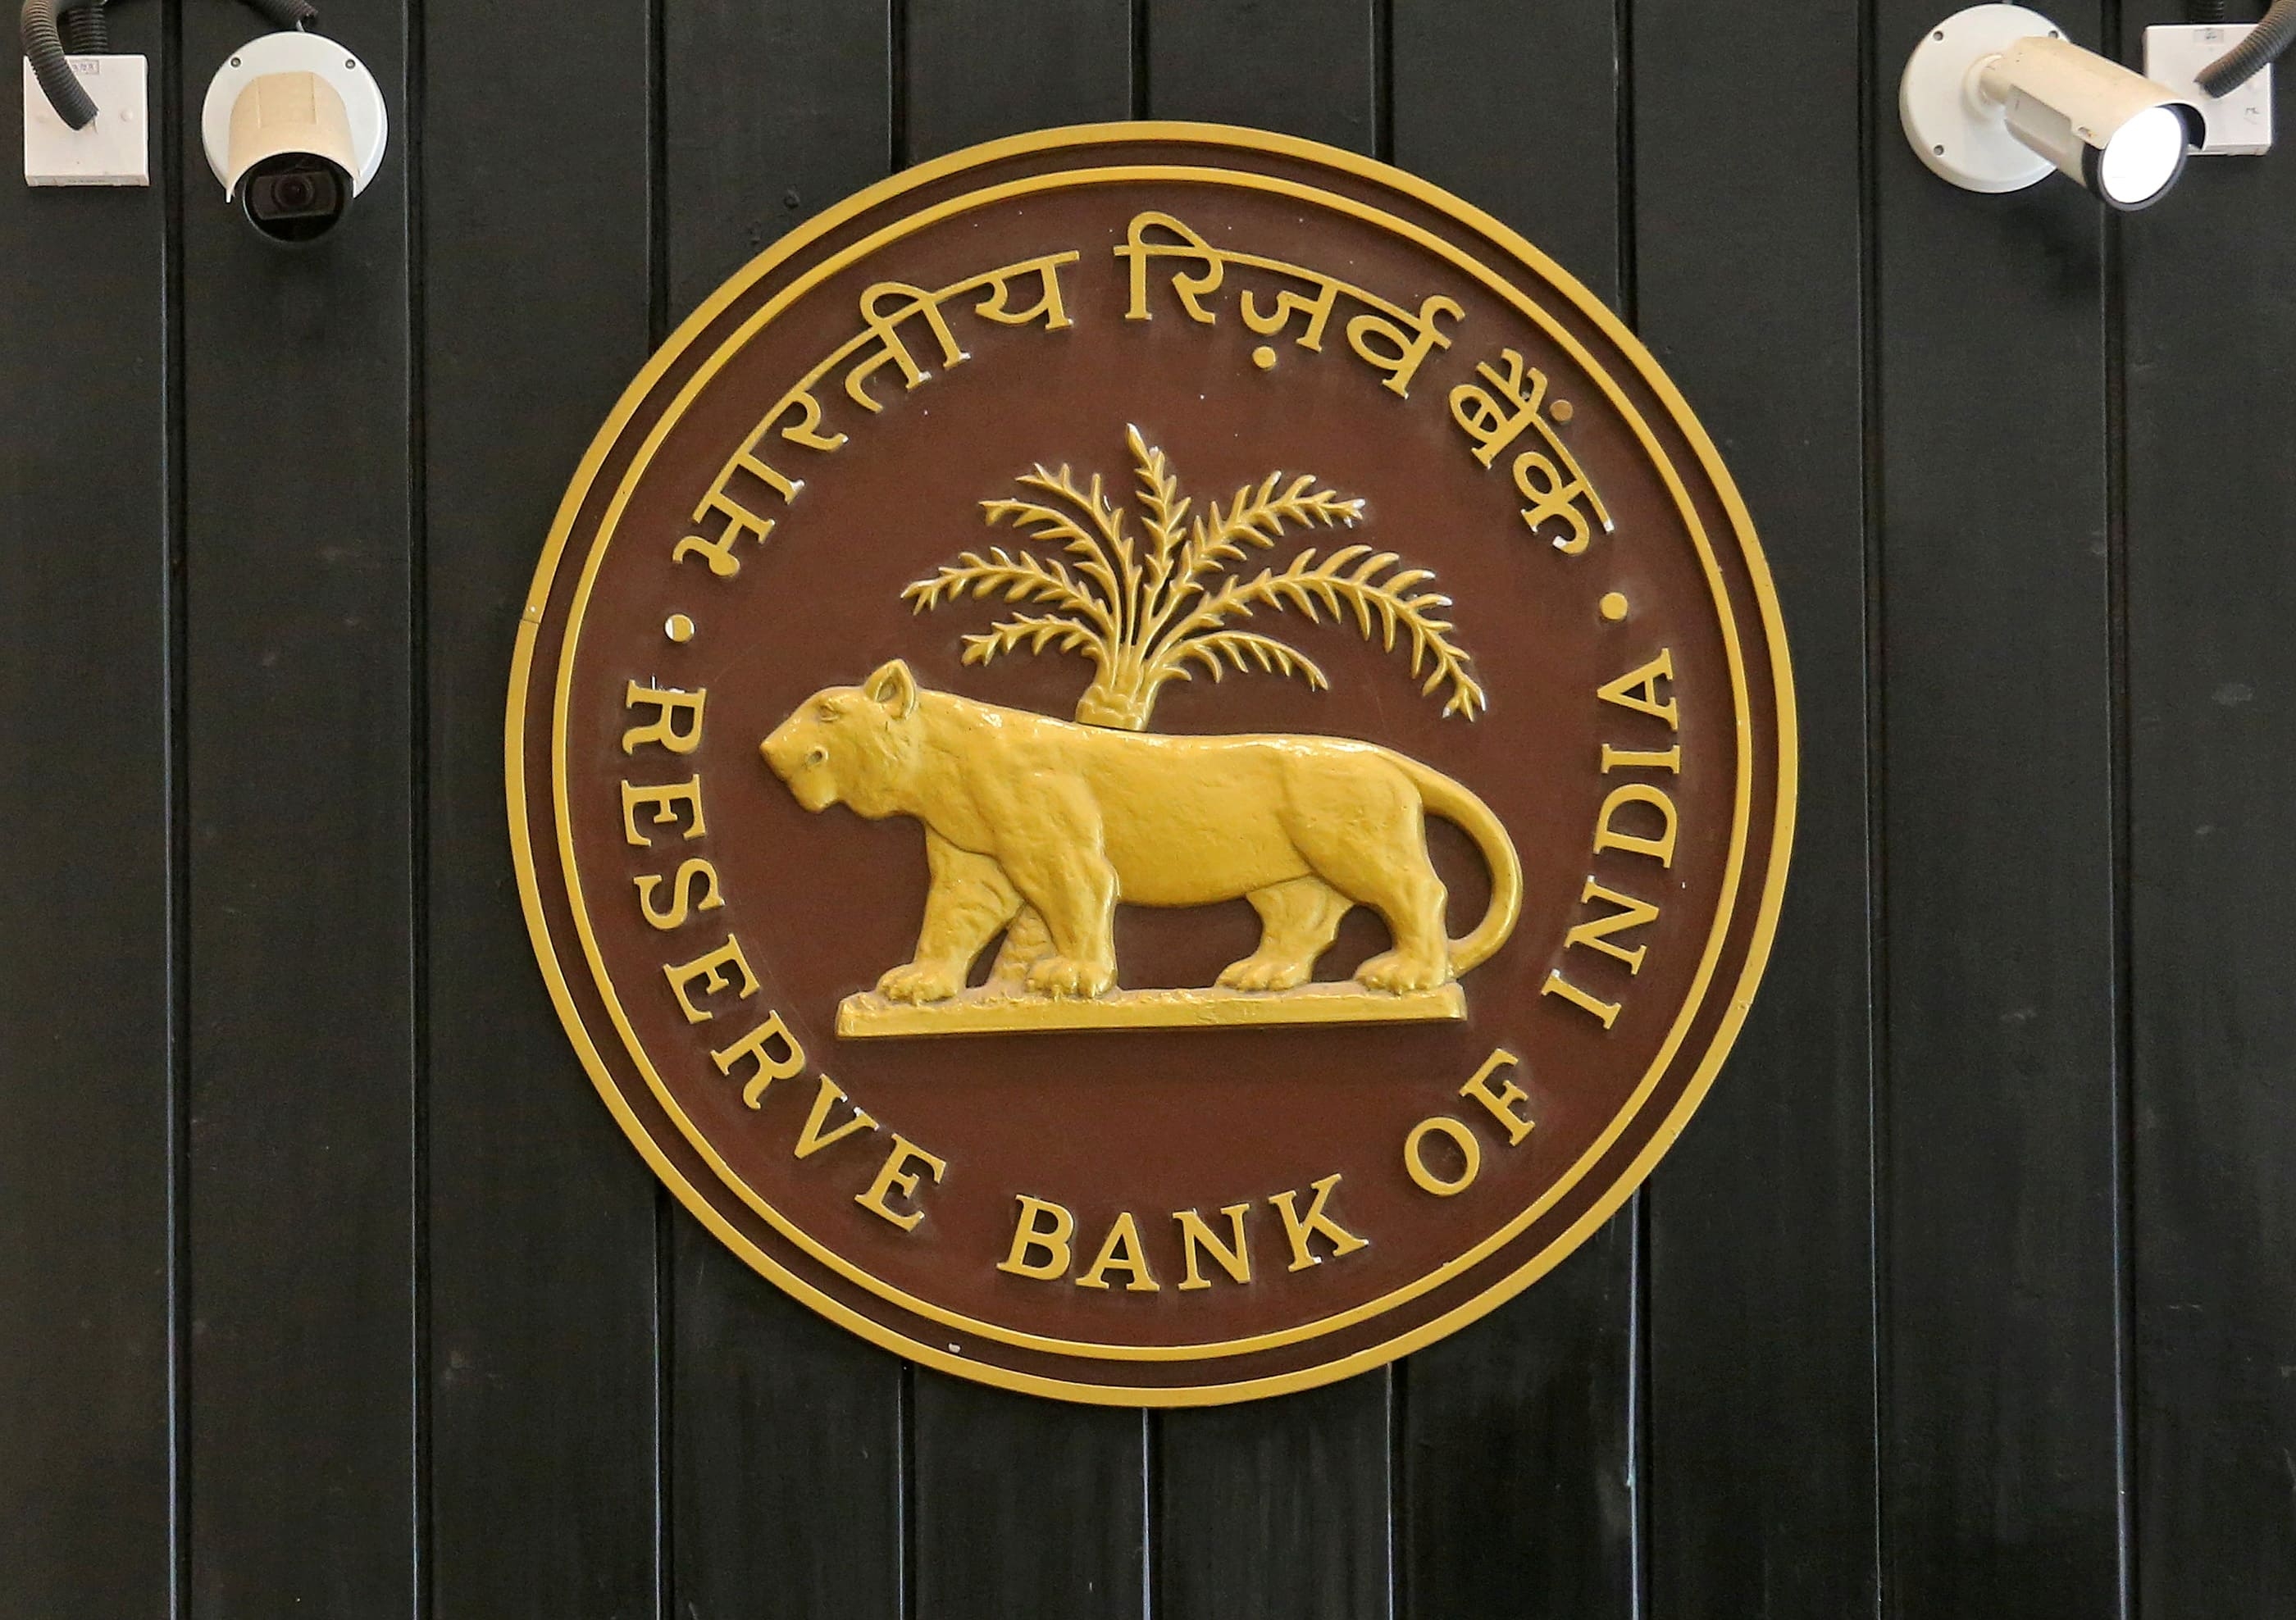 The Reserve Bank of India Monetary Policy Committee (MPC) has kept policy rates unchanged yet again – for the 11th time in a row on Friday. However, economists said that the MPC may gradually hike policy rates later this year to fight rising inflation.